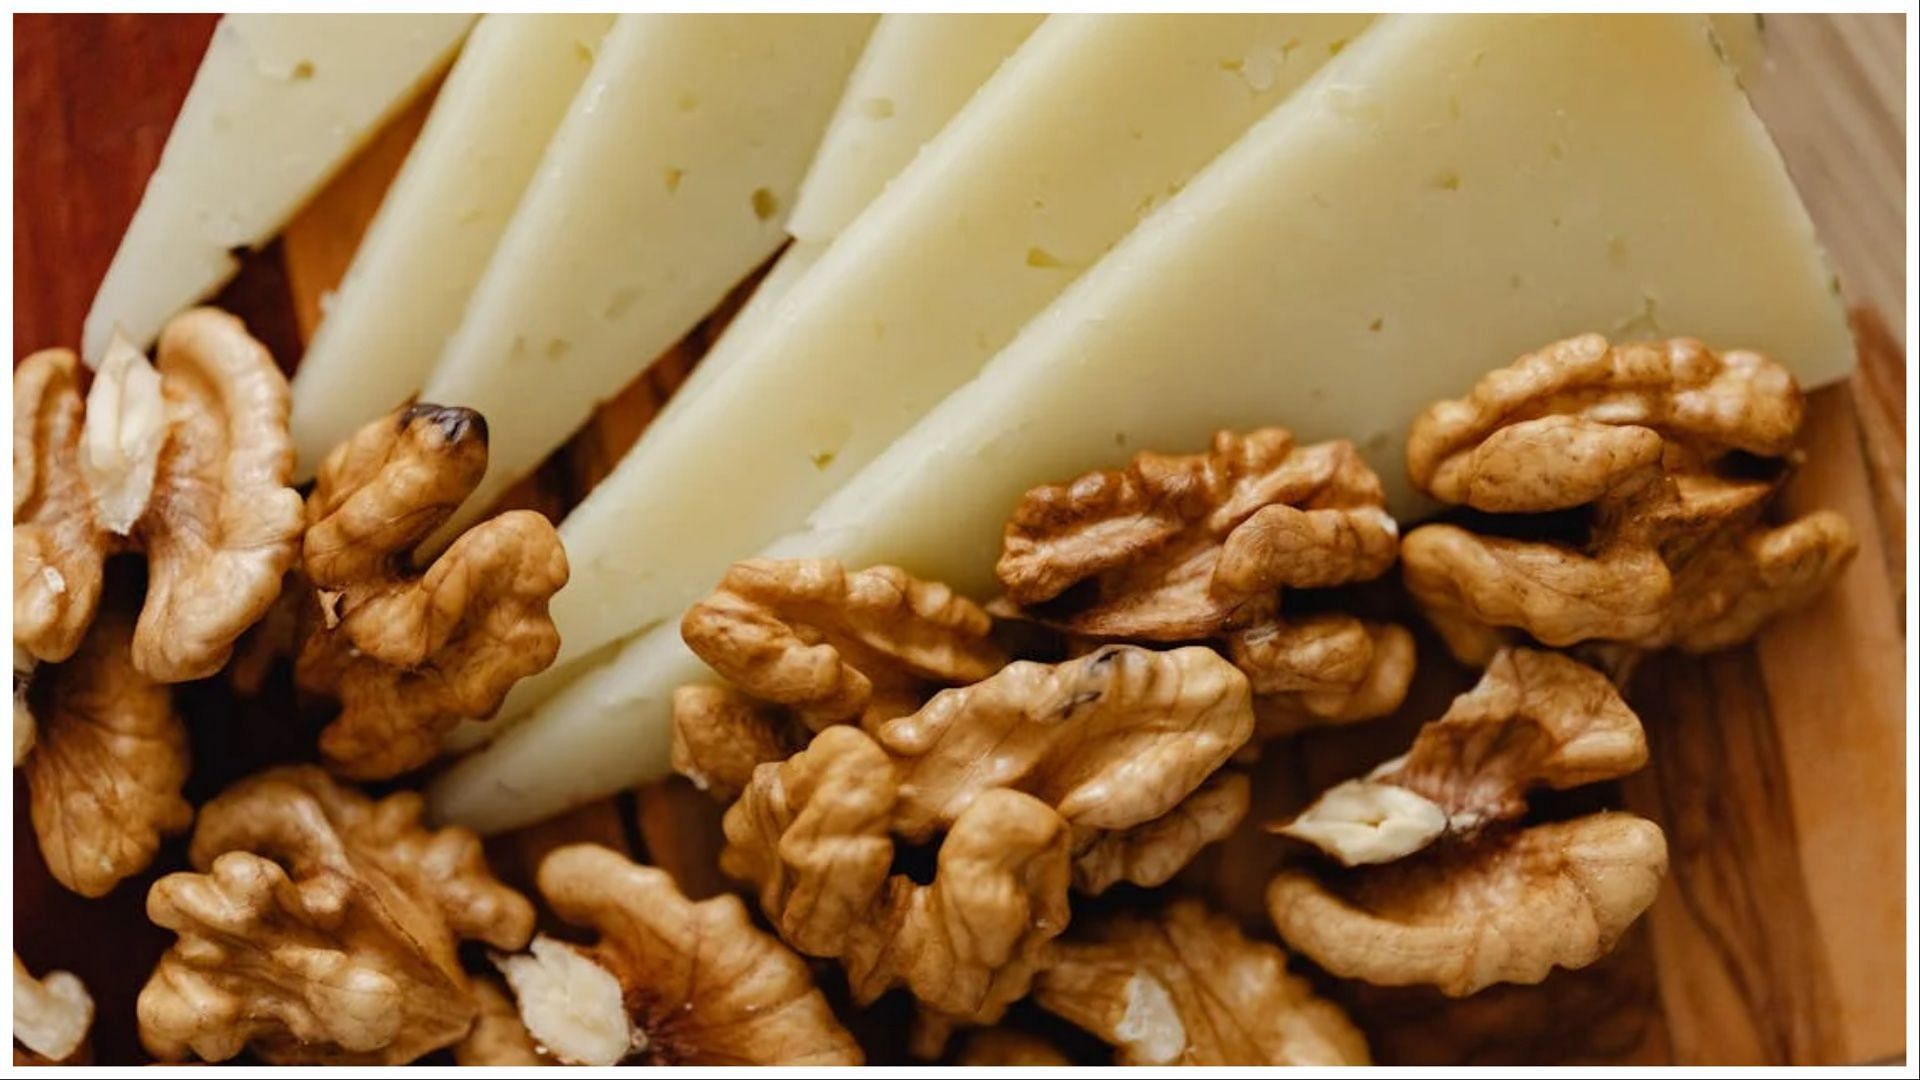 The doctor had nut and dairy allergies (Image via Pexels)